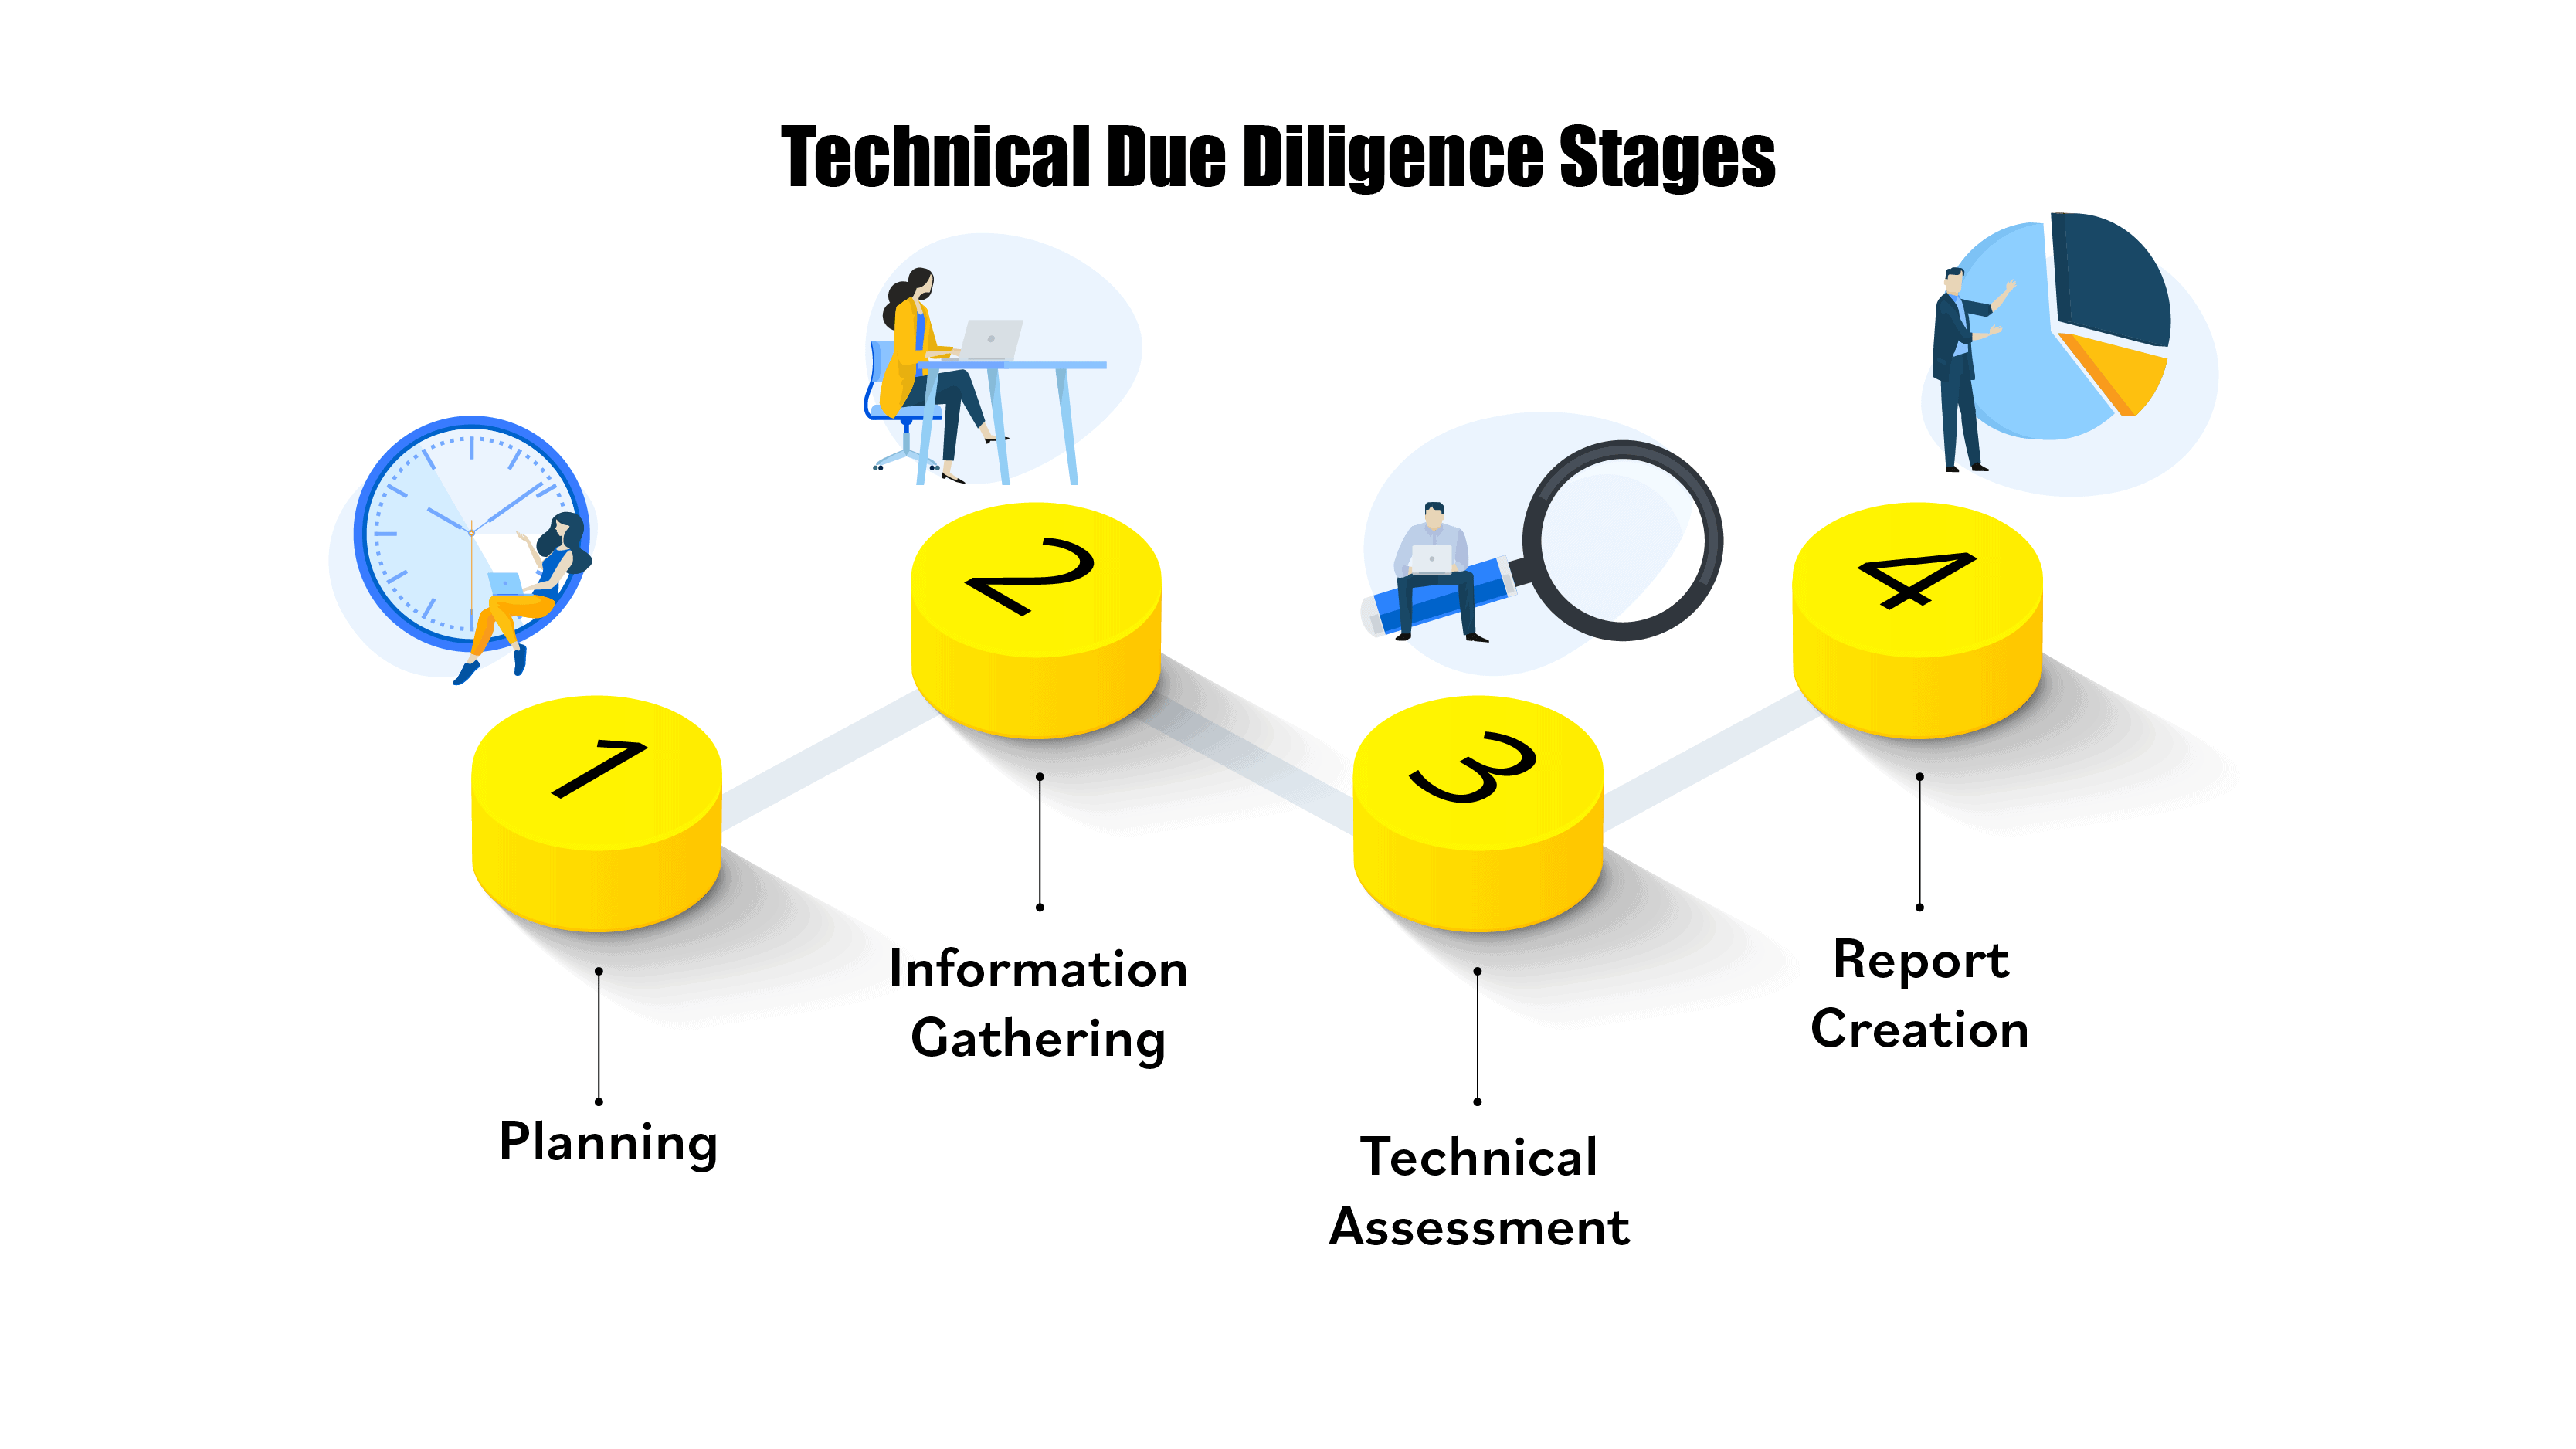 Technical Due Diligence Stages